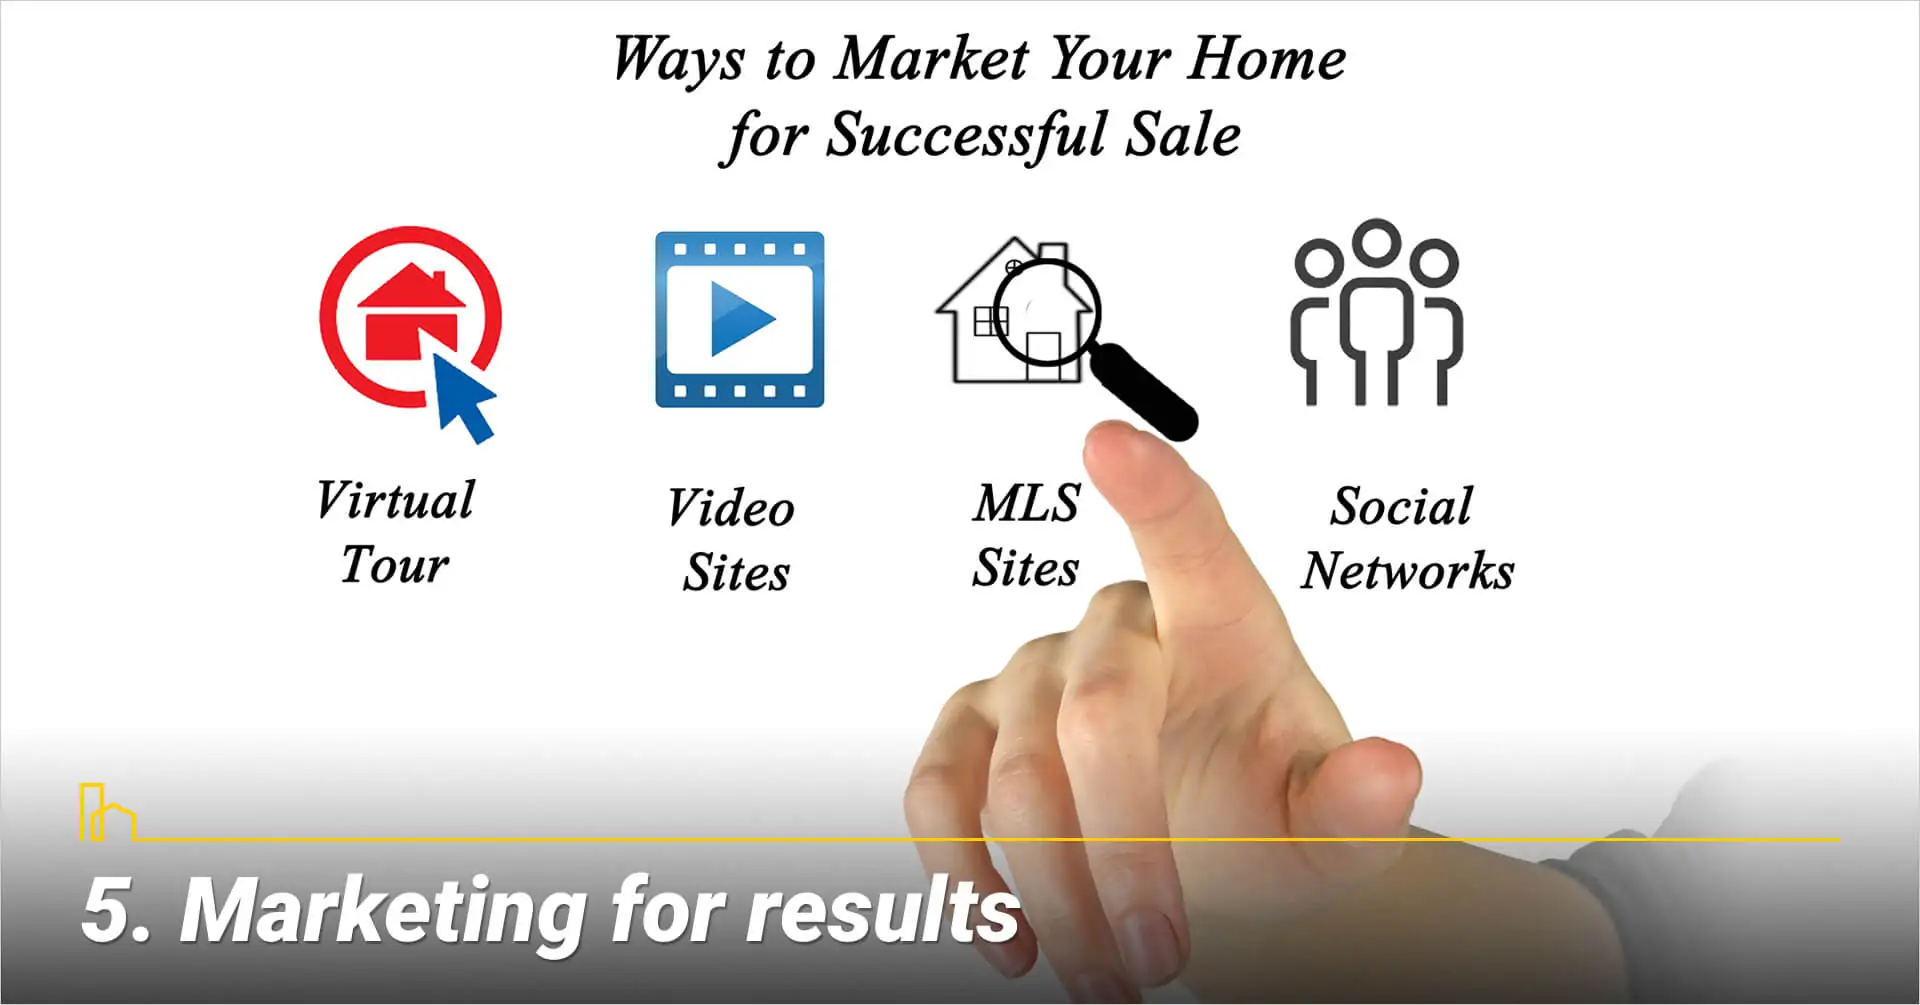 Marketing for results, strategically market your home